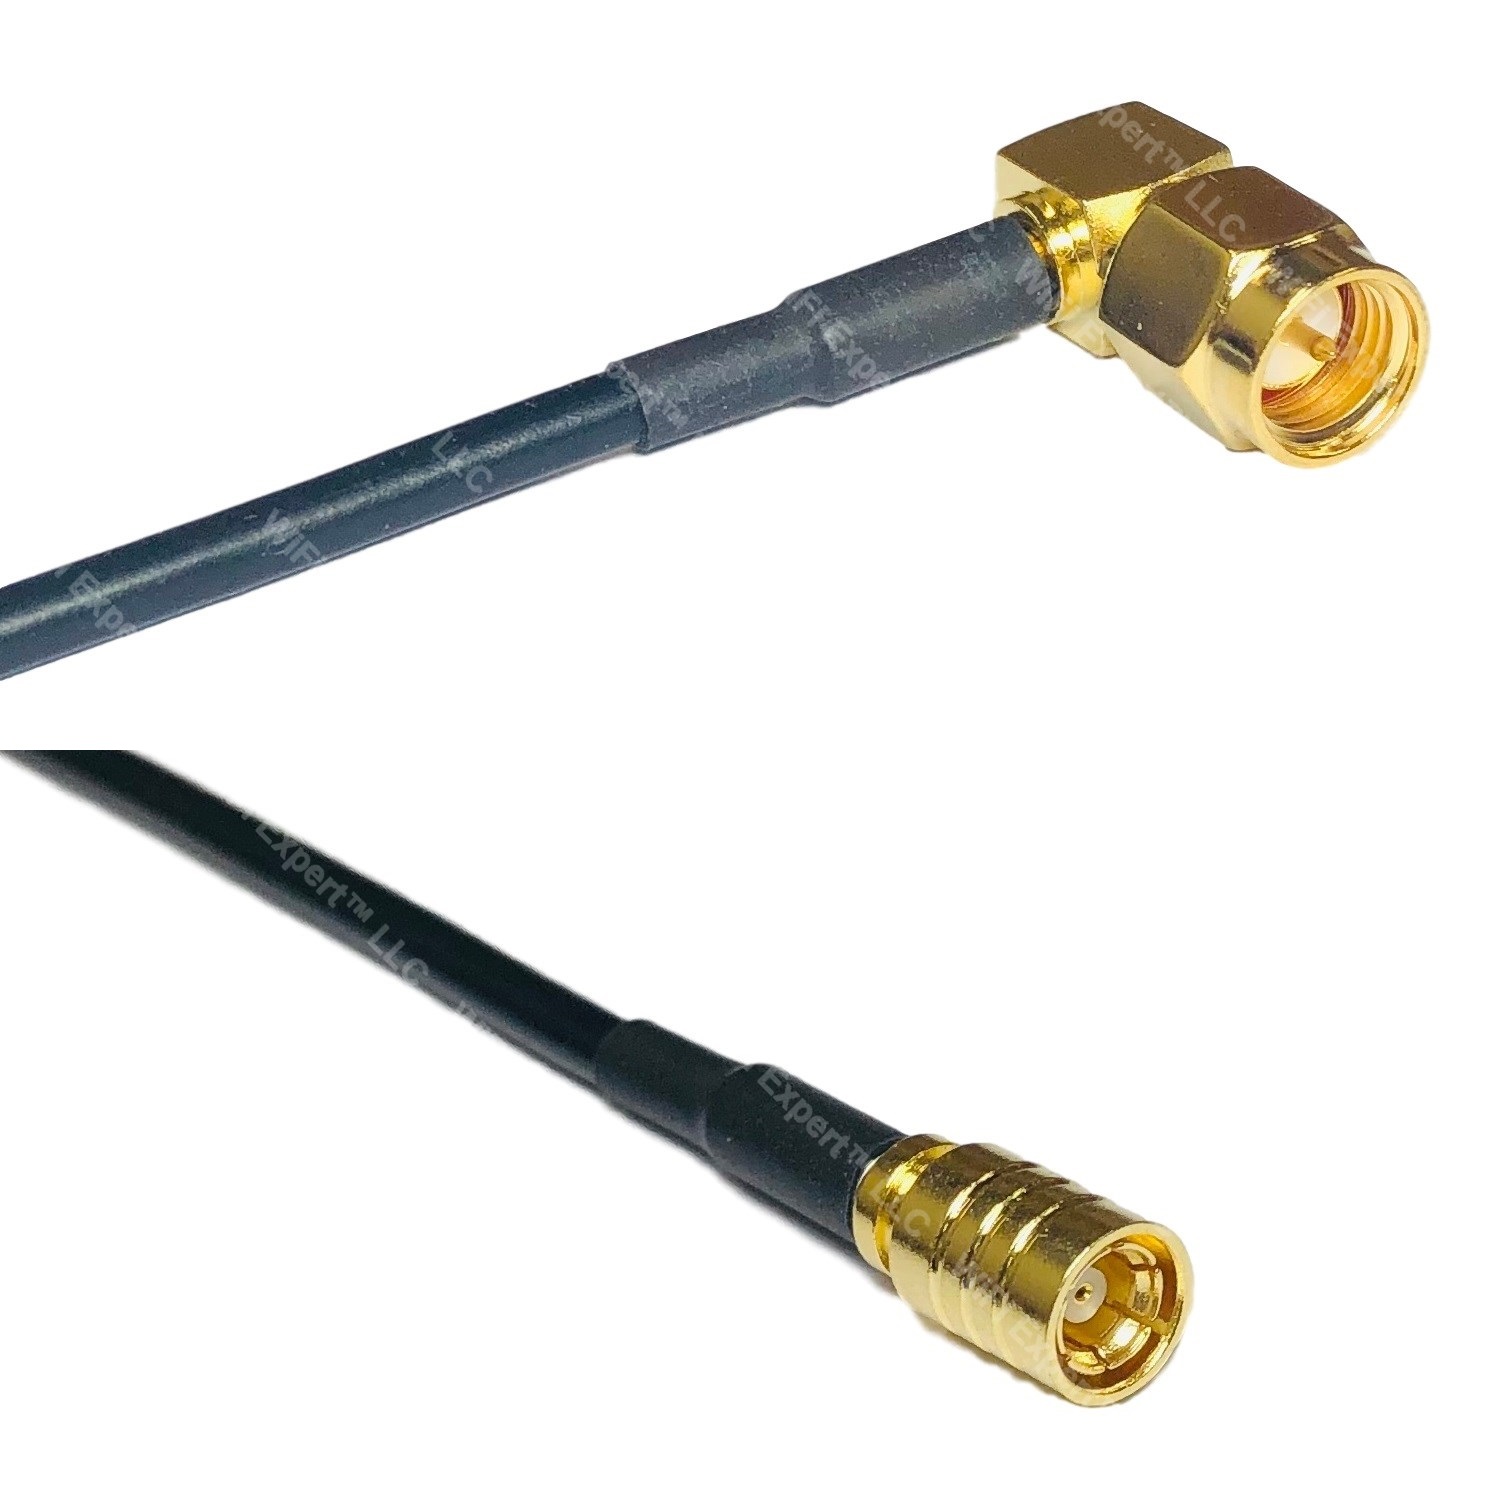 USA-CA RG174 MCX MALE to MCX FEMALE Coaxial RF Pigtail Cable 